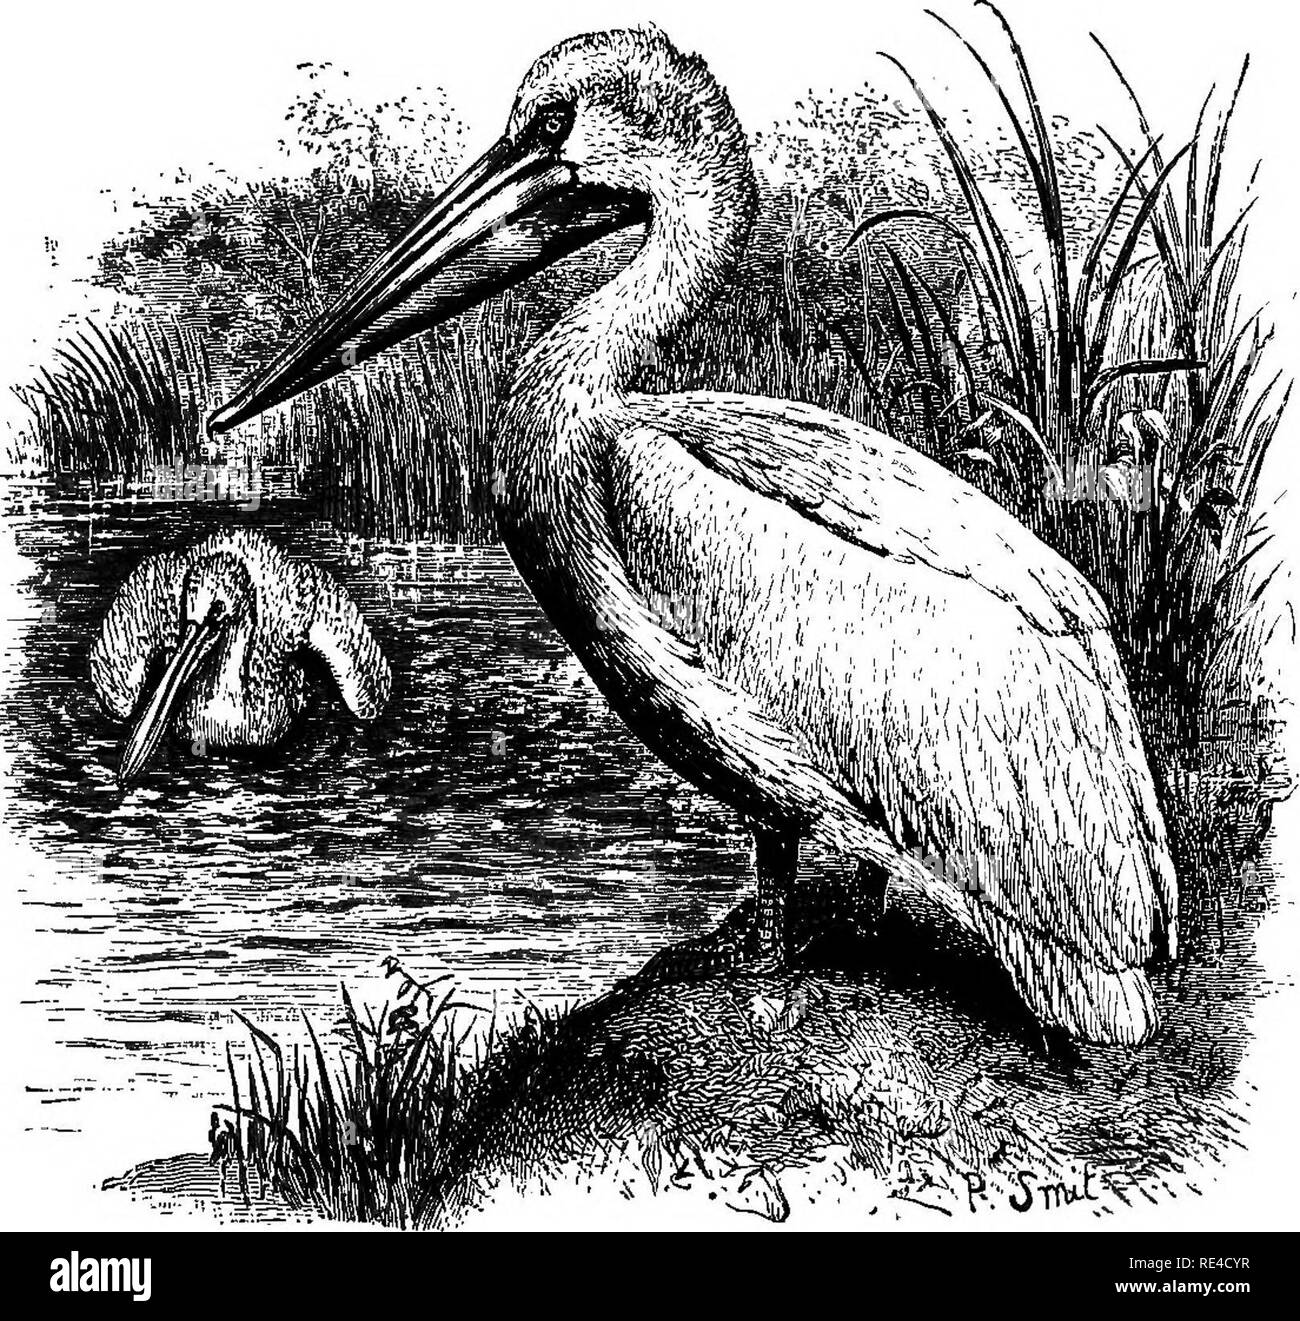 . Birds. Birds. Fig. 75.—Felecamis crispiis. Order XIX. STEGANOPODES. This order contains the Pelicans, Trigate-birds, Cormorants, Gannets or Boobies, and Tropic-birds—all distinguished by having the four toes united by a web (fig. 76). There is a great difference between the preceding order—the schizognathous Gavise—and that now under consideration. The Steganopodes are desmognathous birds, distinctly connected with the ^ccipitres, and might have followed the diurnal Birds of Prey in the classification. The orders to be hereafter discussed have more or less connexion with the Stegnnopodes. Th Stock Photo